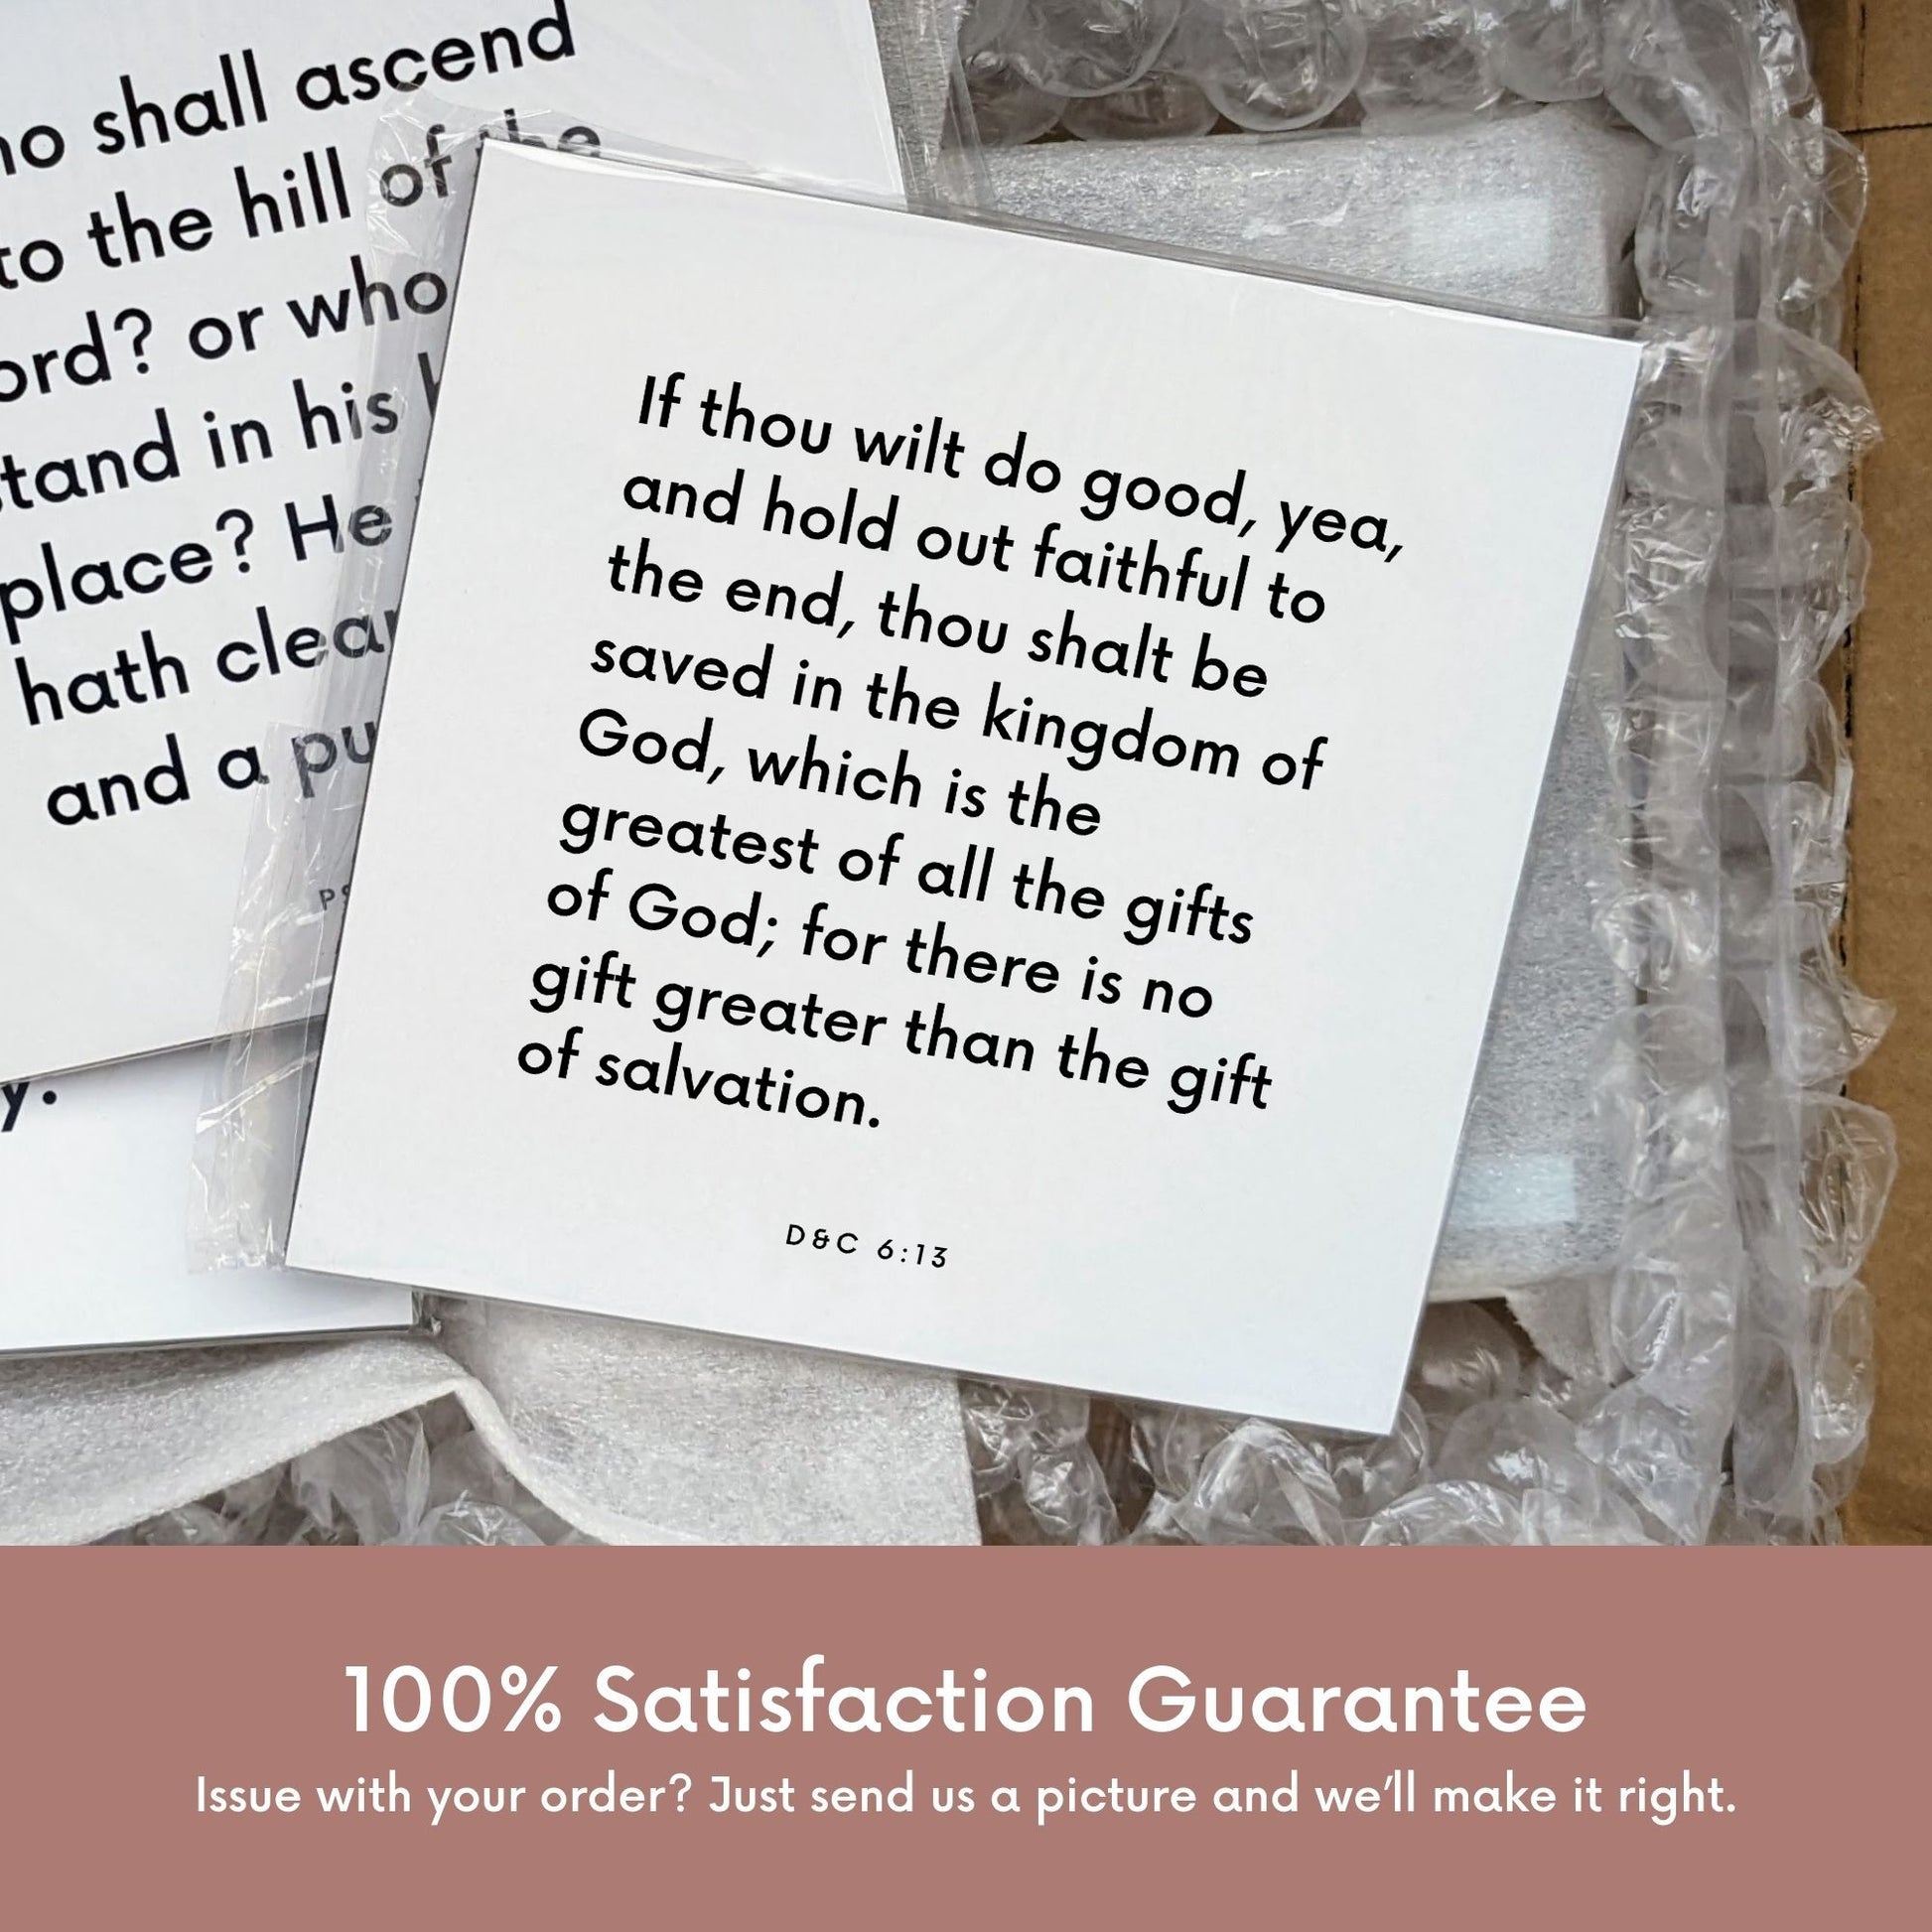 Shipping materials for scripture tile of D&C 6:13 - "There is no gift greater than the gift of salvation"